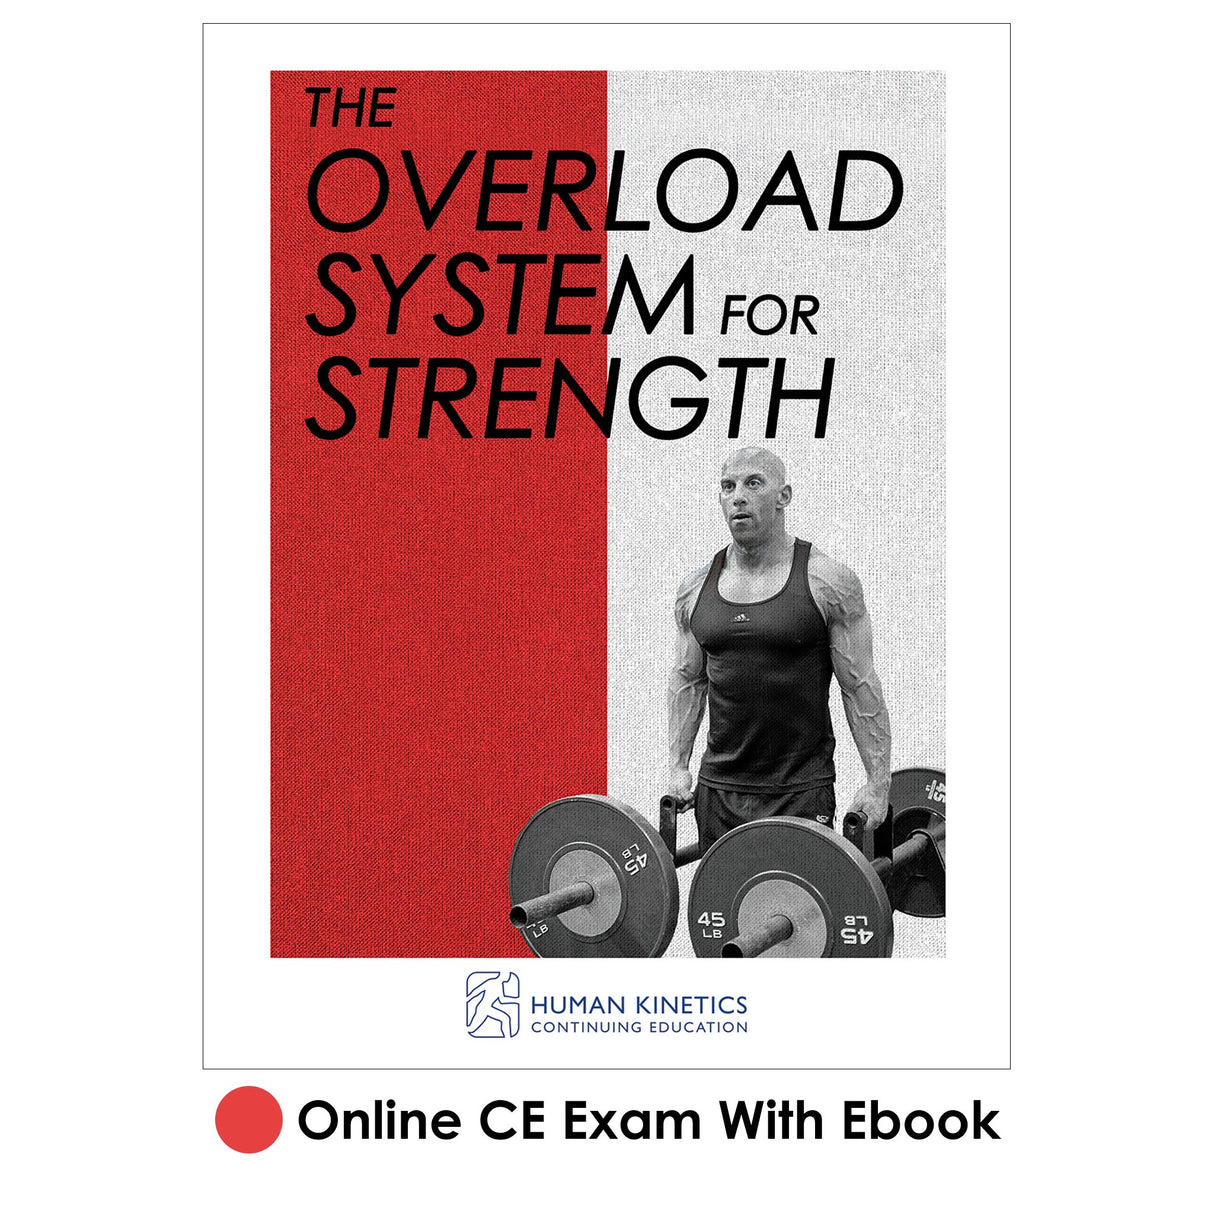 Overload System for Strength Online CE Exam With Ebook, The